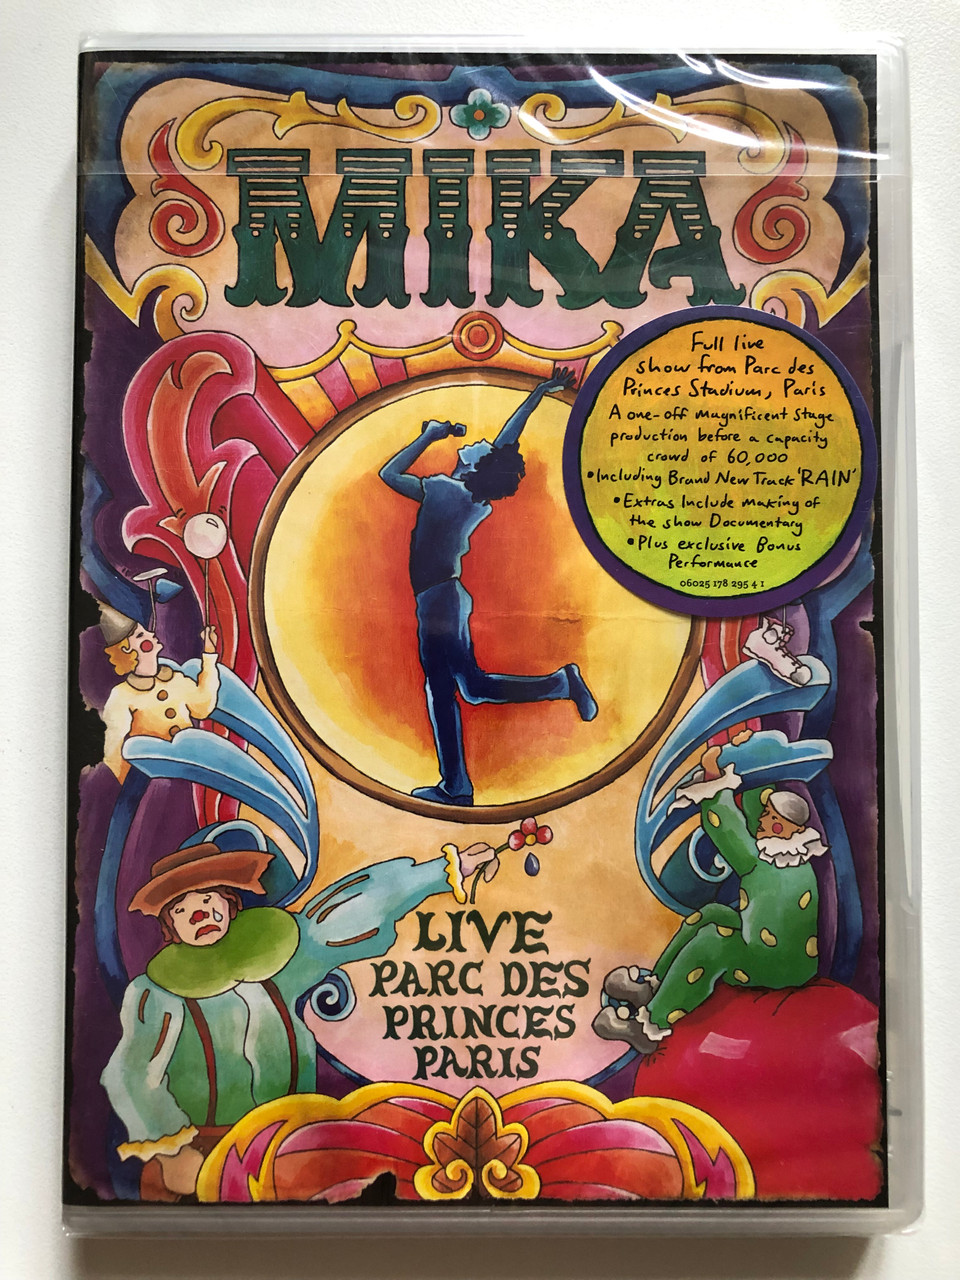 https://cdn11.bigcommerce.com/s-62bdpkt7pb/products/0/images/321932/MIKA_Live_Parc_Des_Princes_Paris_Full_live_show_from_Parc_des_Princes_Stadium_Paris_Including_Brand_New_Track_Rain_Extras_include_making_of_the_show_Documentary_Universal_Records_DVD_1__60969.1705593124.1280.1280.JPG?c=2